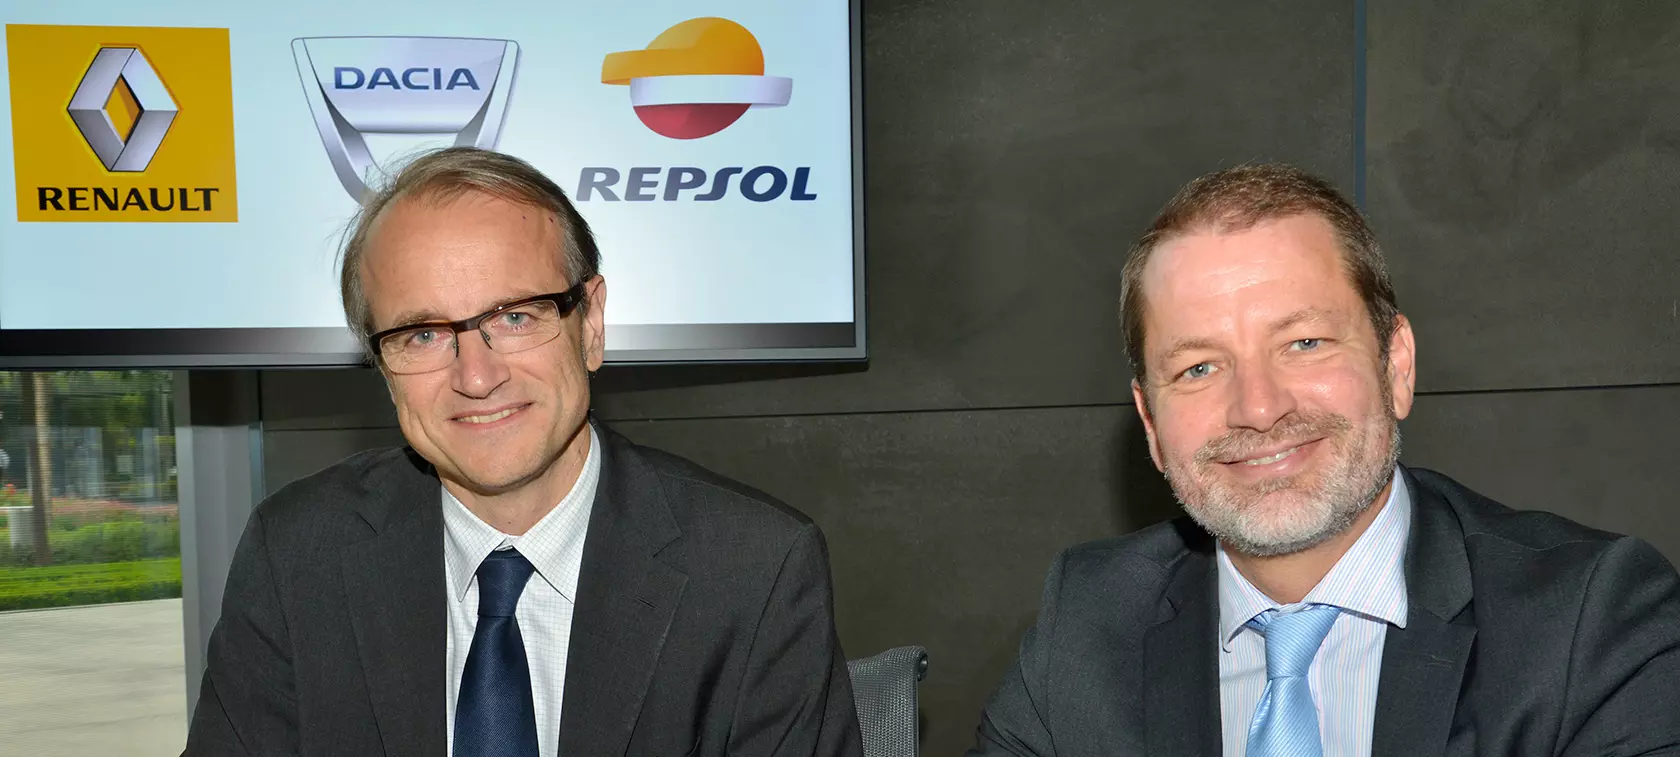 Repsol and Renault - new chapter